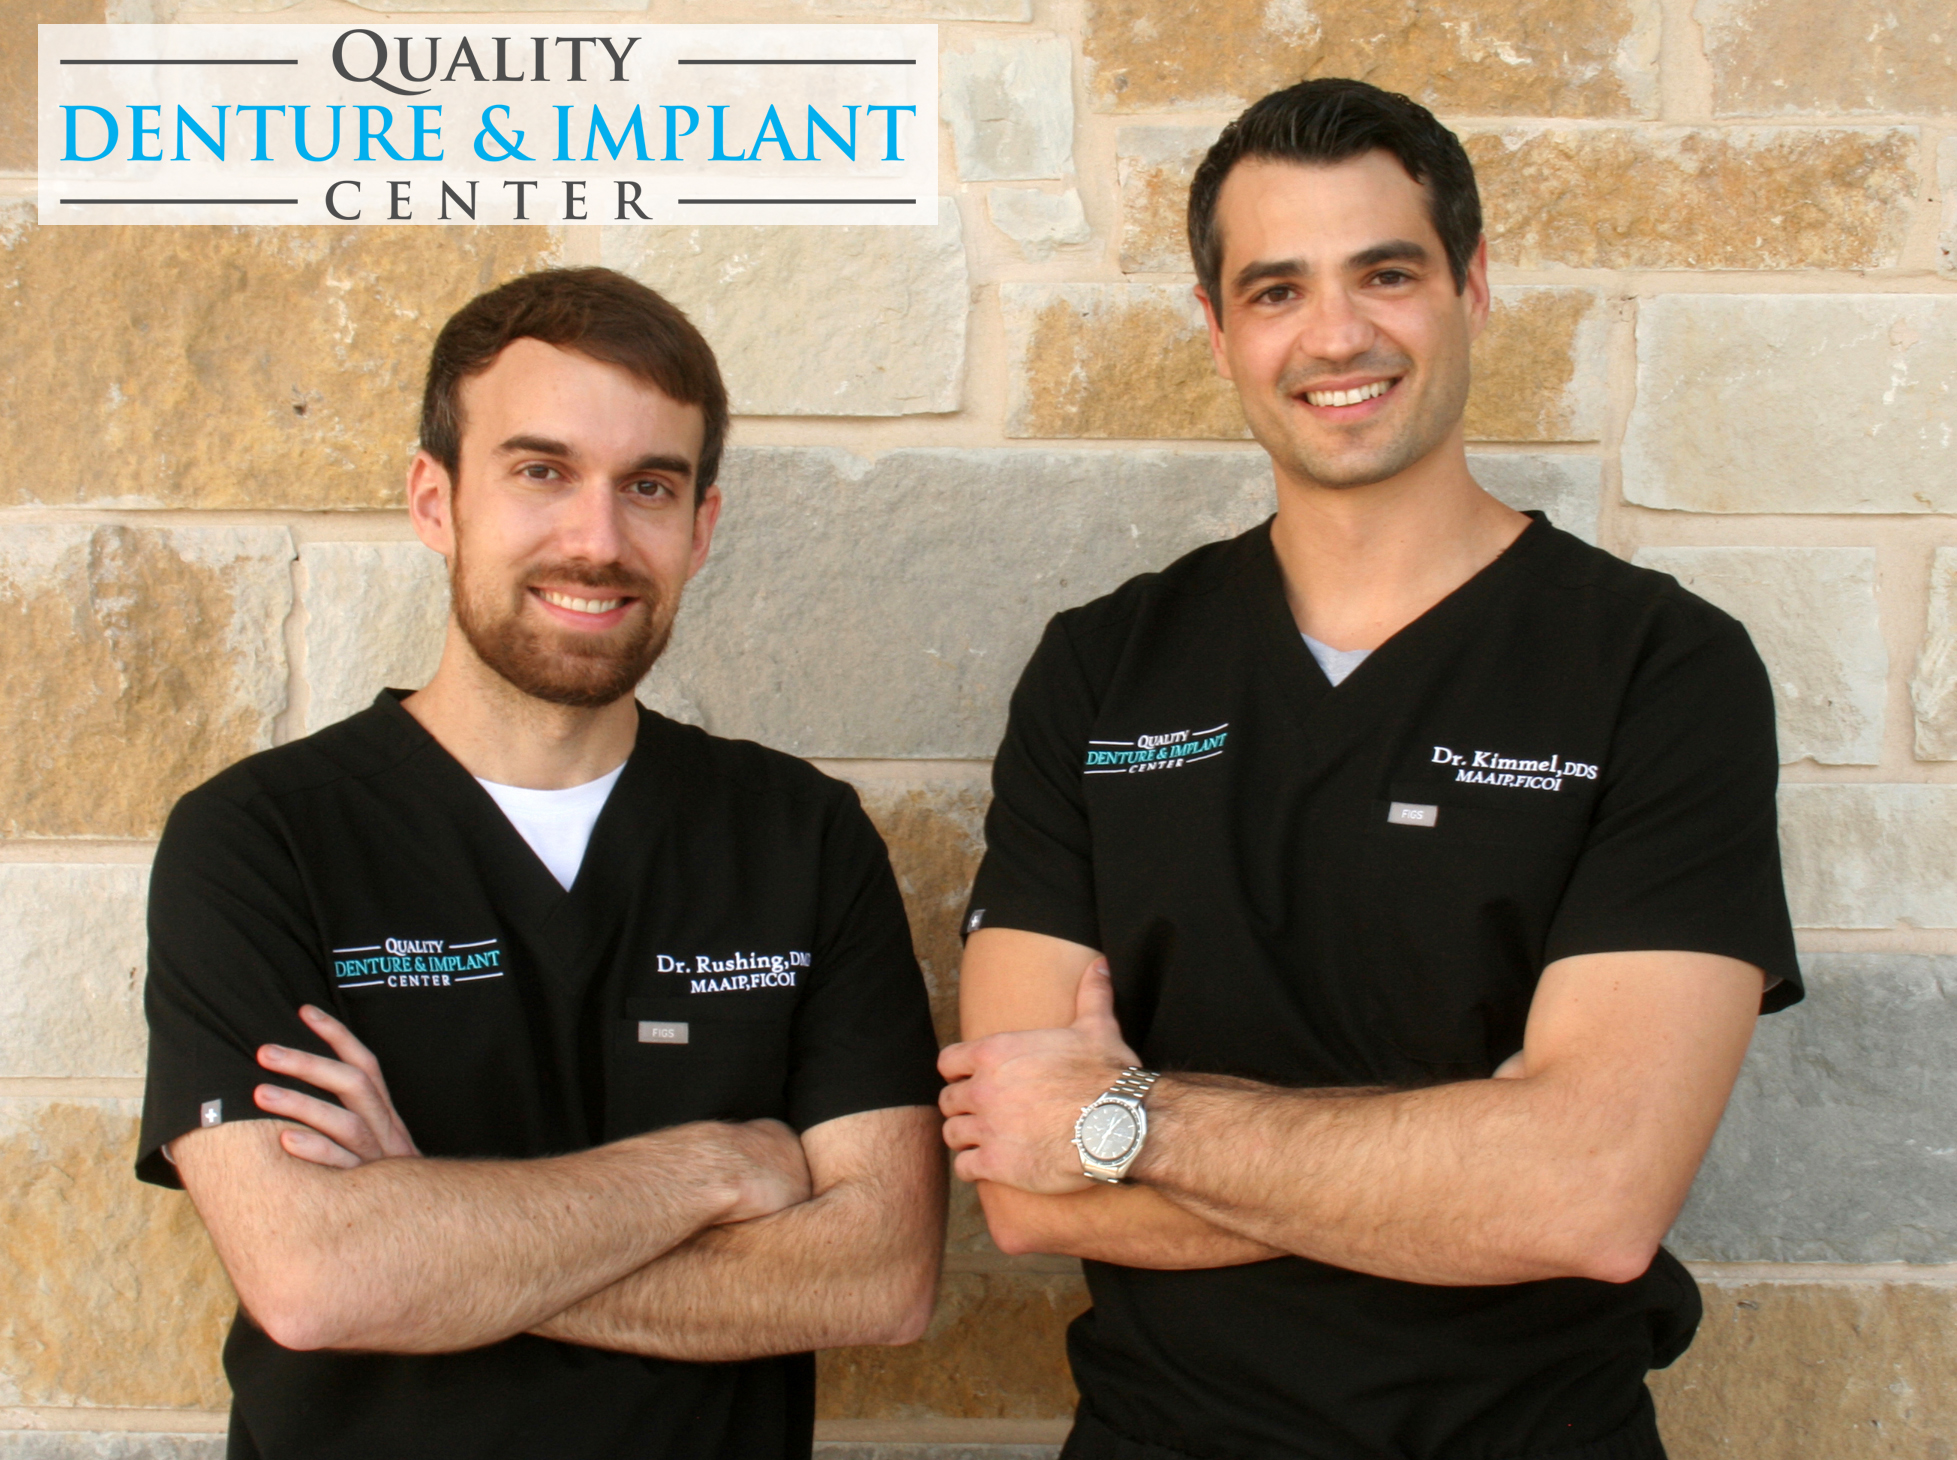 Quality Denture and Implant Center